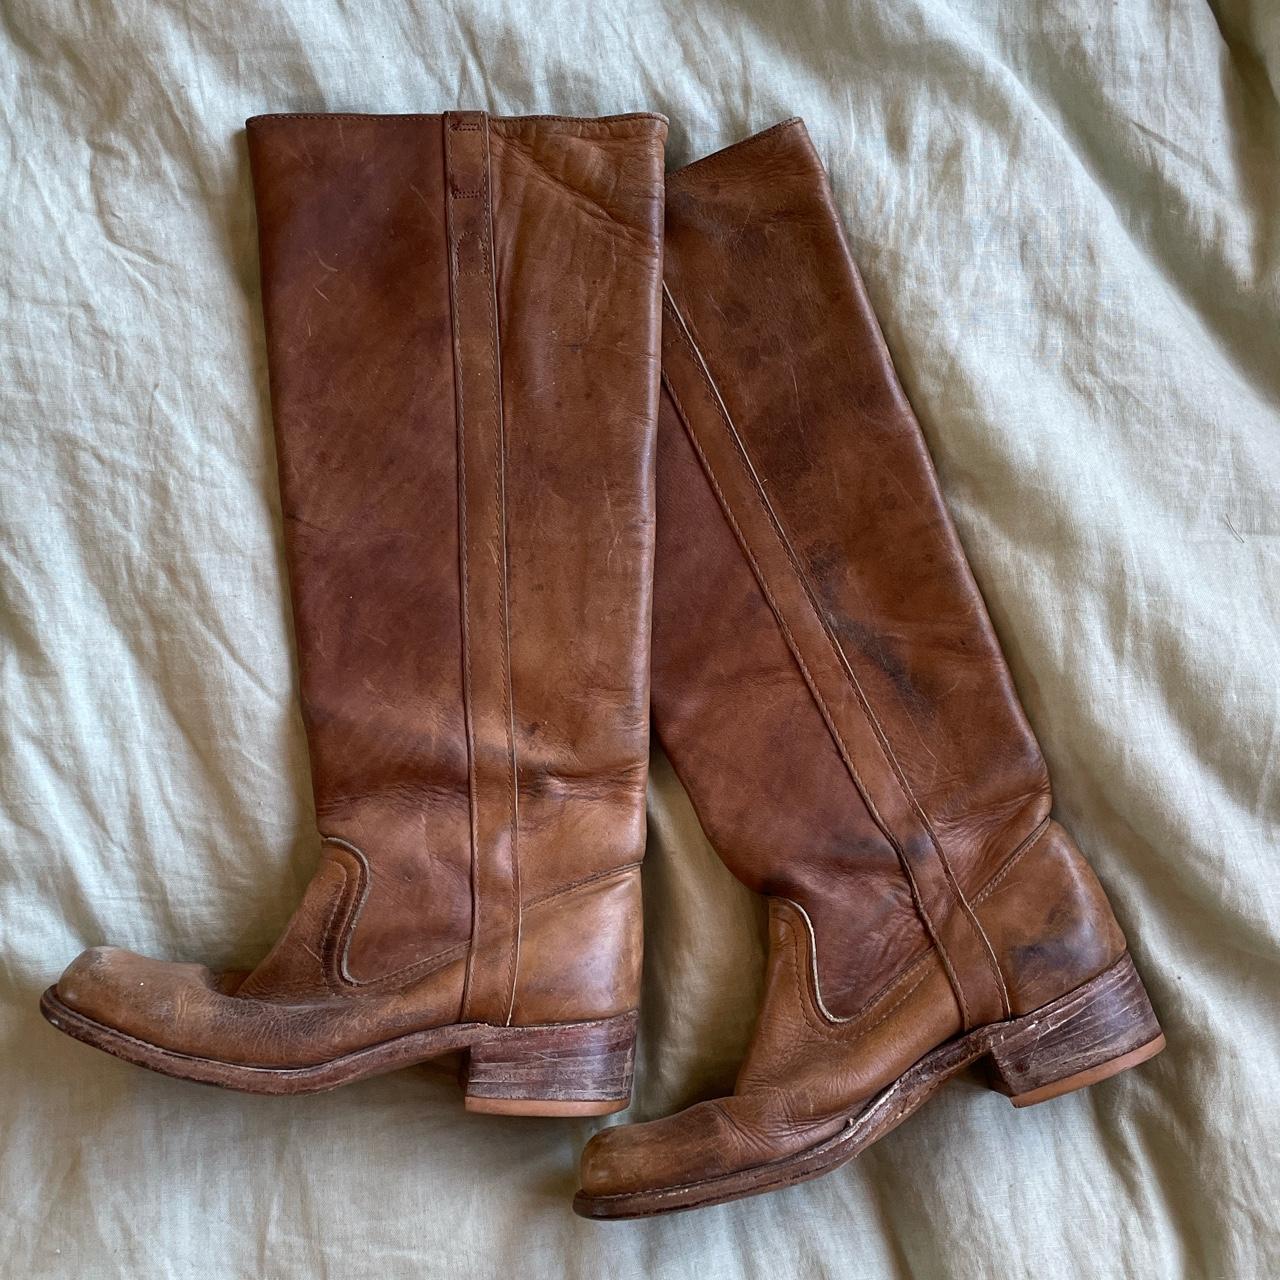 Frye Women's Brown and Tan Boots